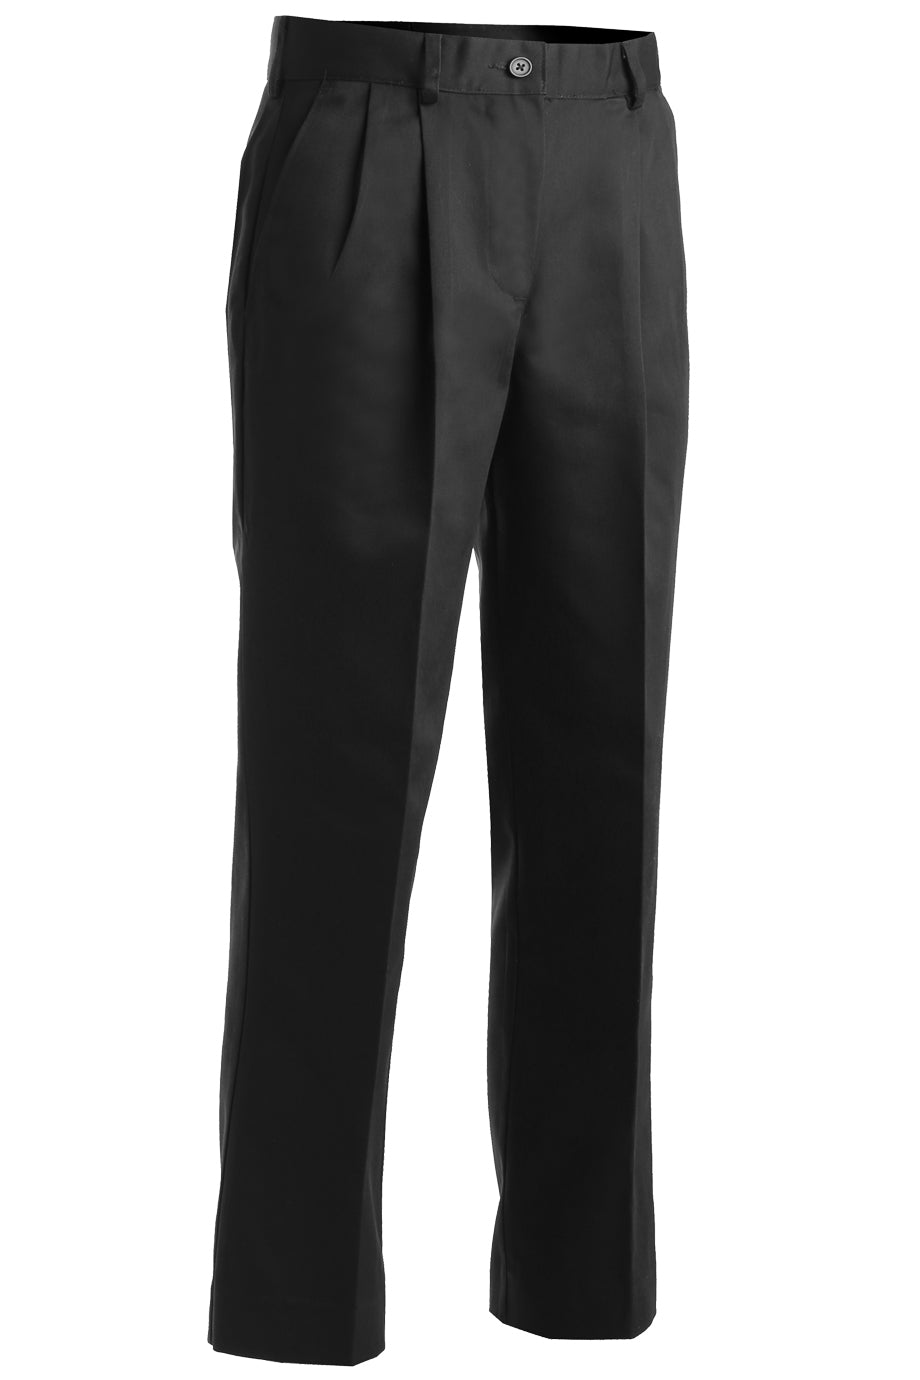 Pleated Front Chino Utilty Pant